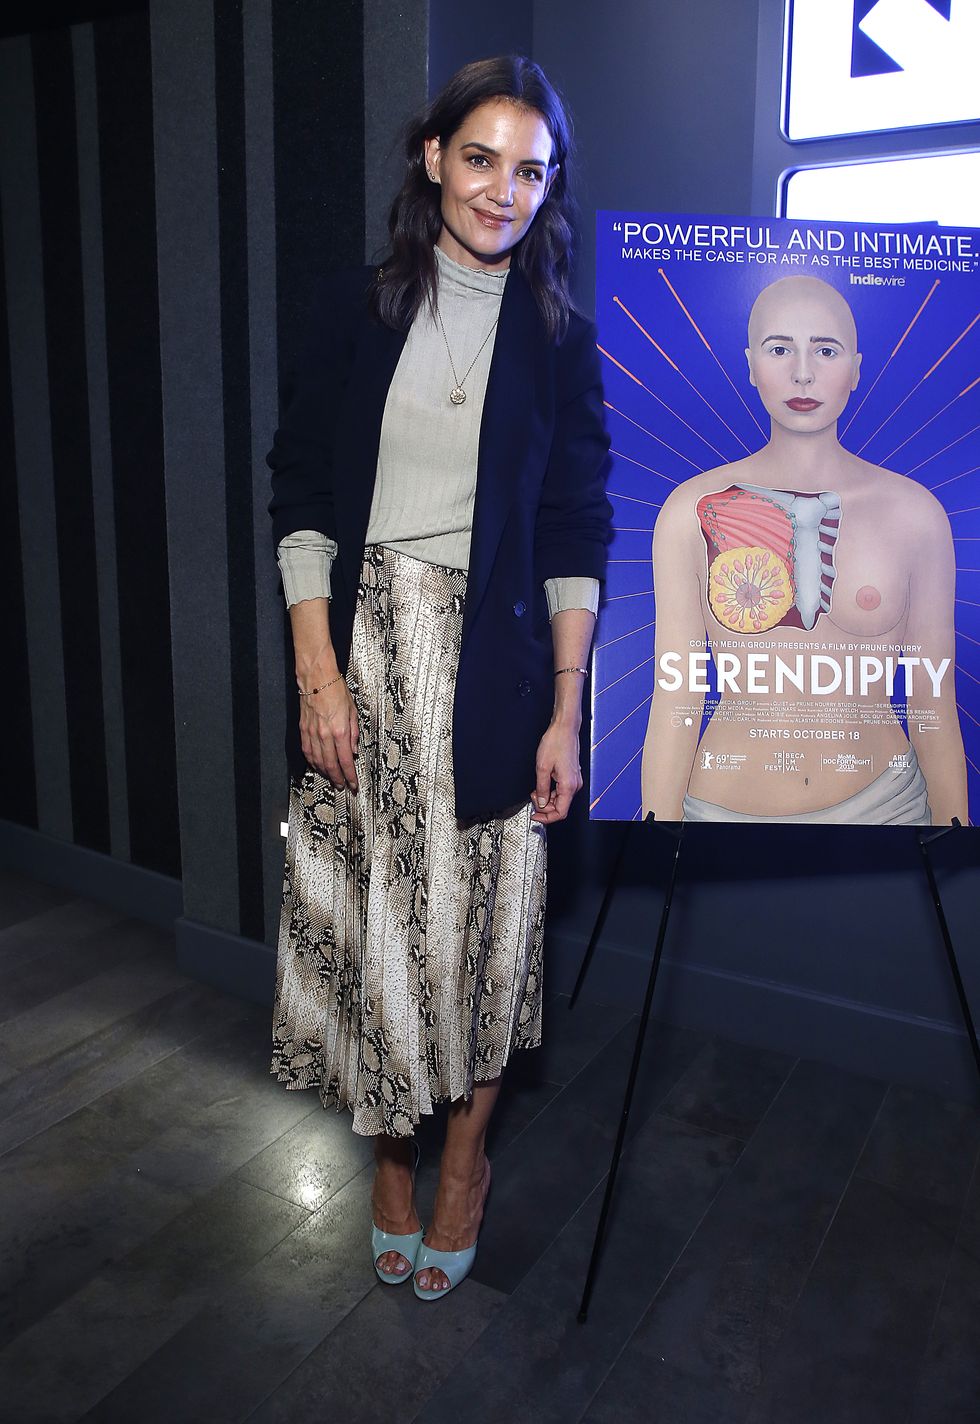 katie-holmes-attends-serendipity-new-york-screening-at-quad-news-photo-1572380314